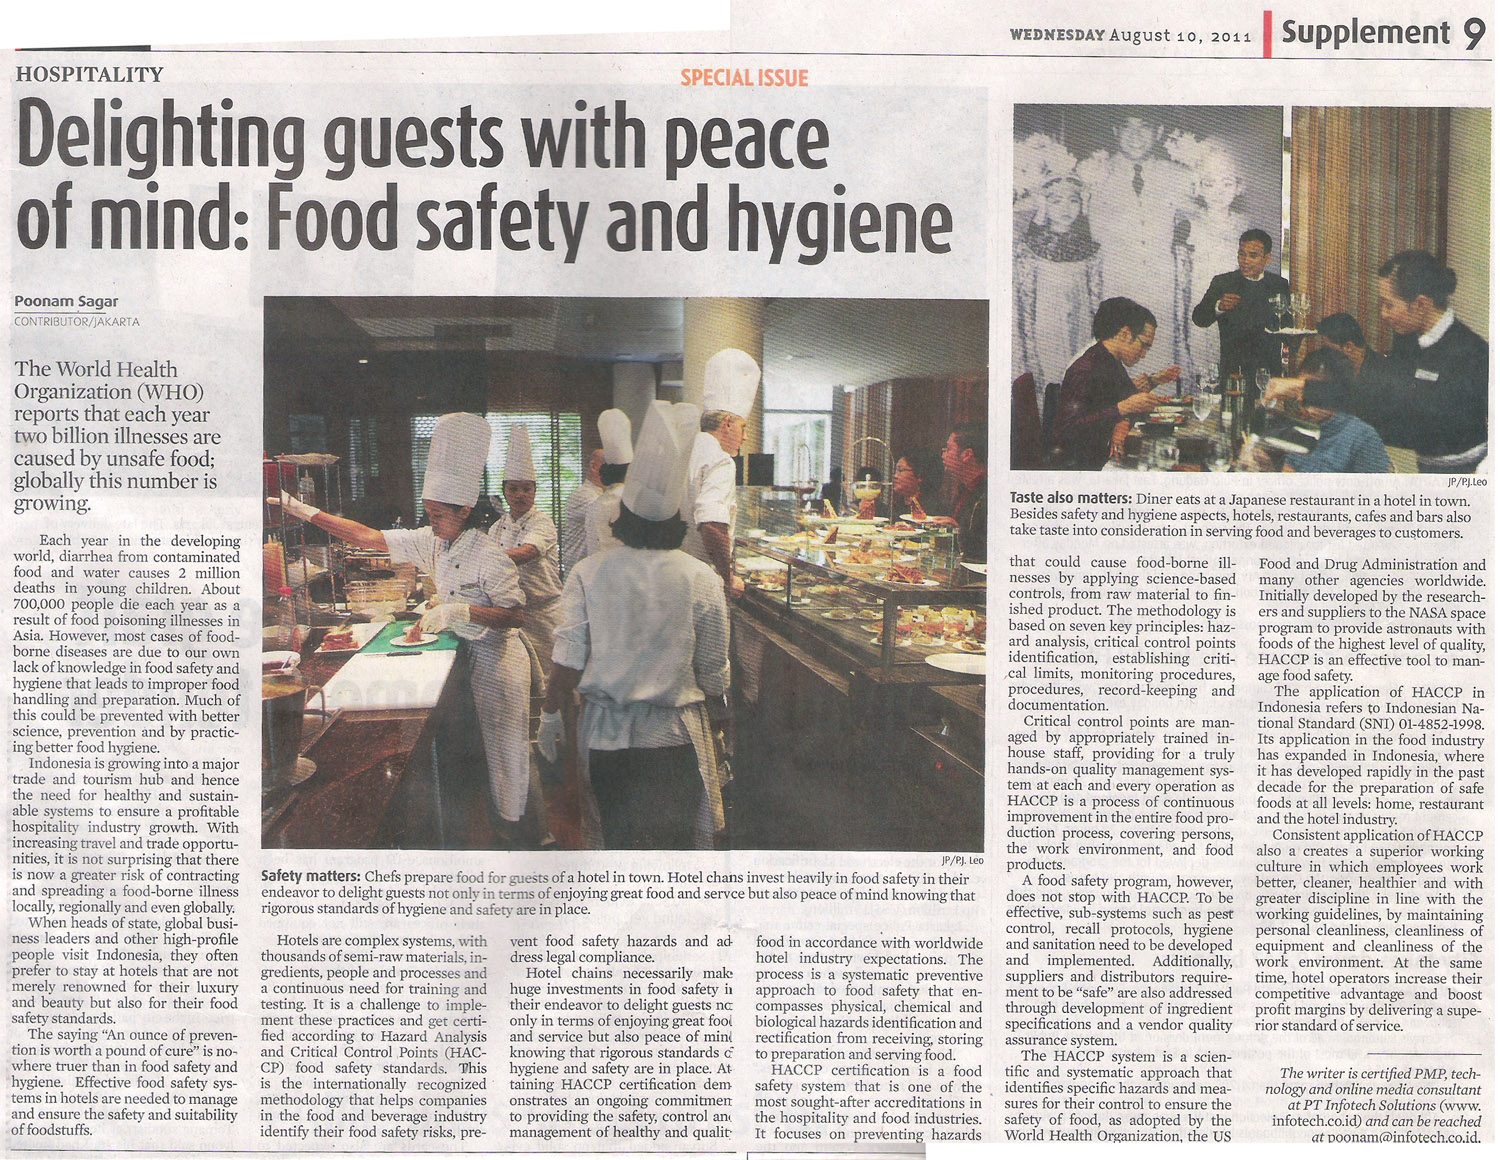 Delighting Guests with Peace of Mind: Food Safety & Hygiene